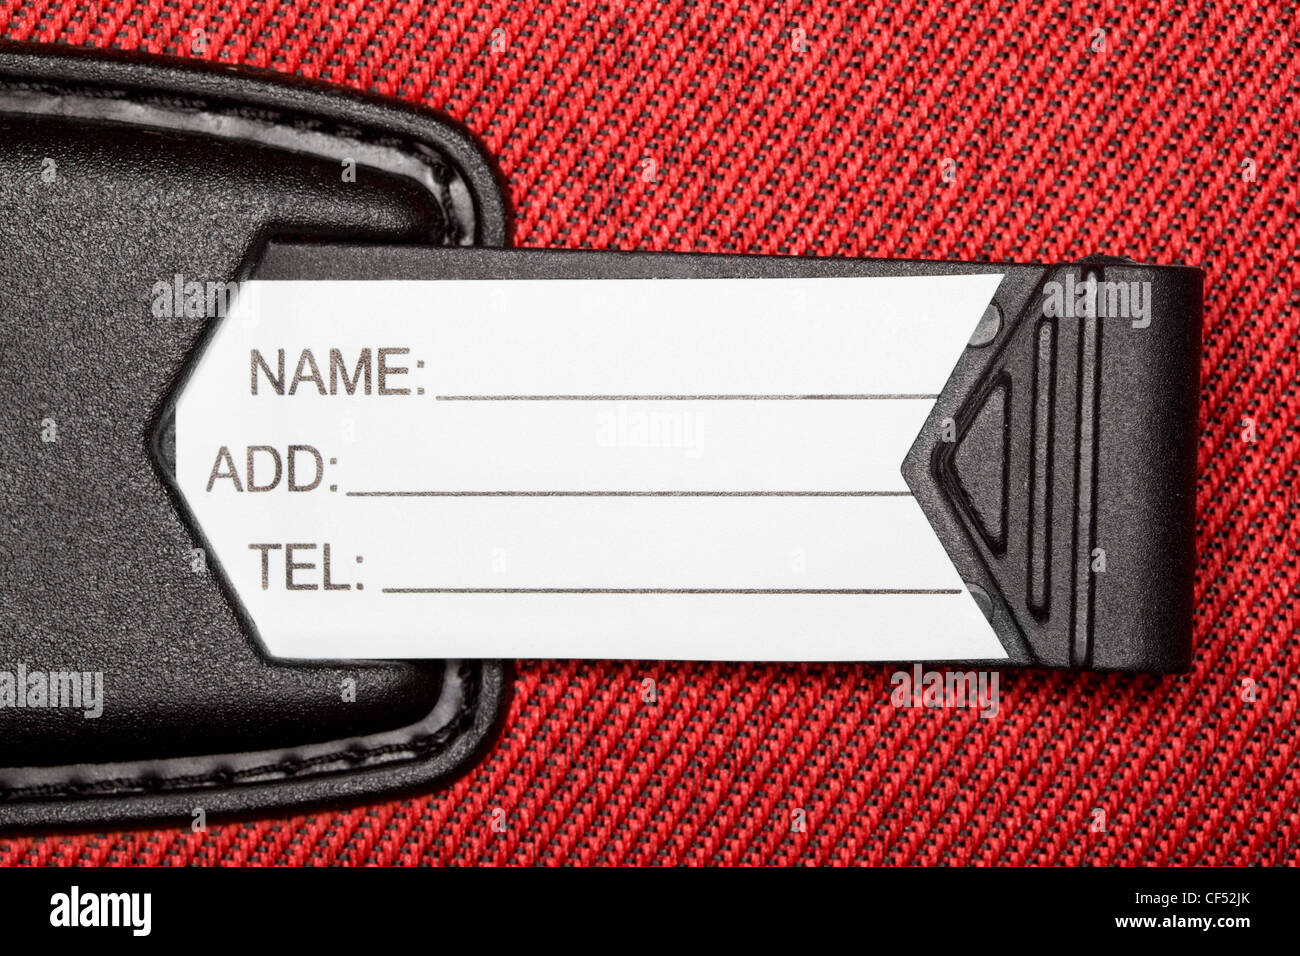 Label with identification data on red textural fabric Stock Photo